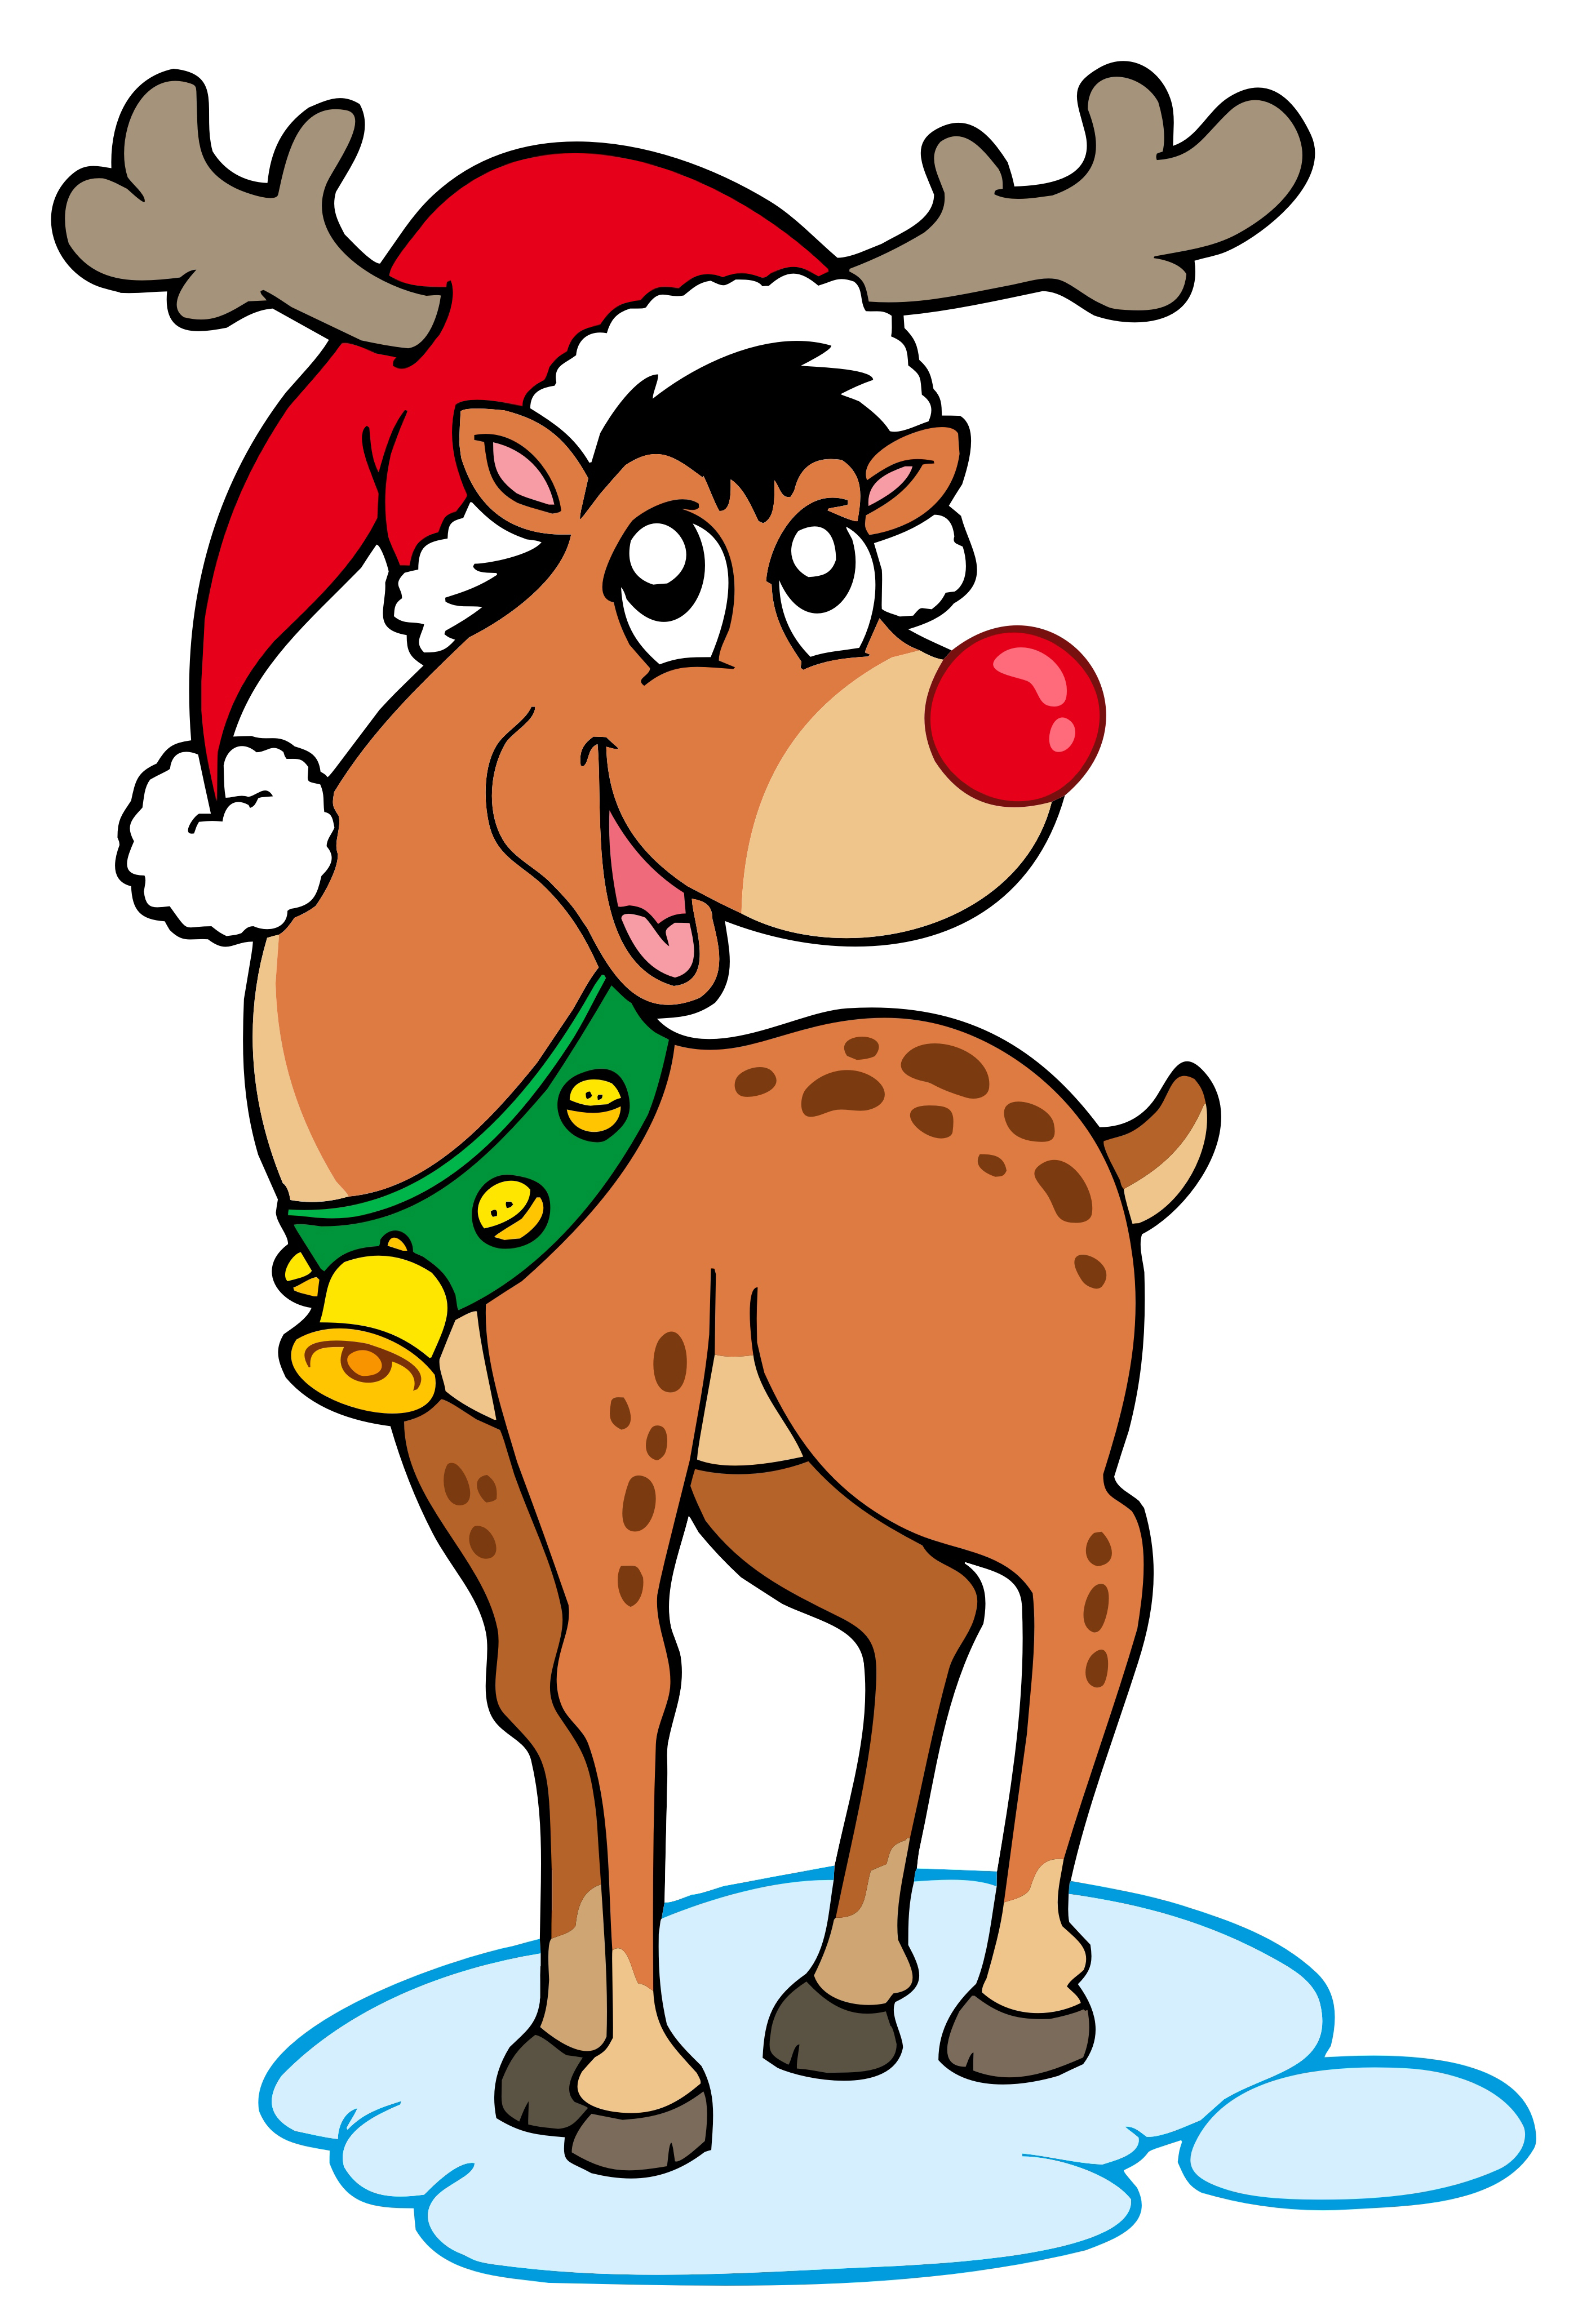 Rudolph The Red Nosed Reindeer Wallpapers 15085 HD Wallpapers ...